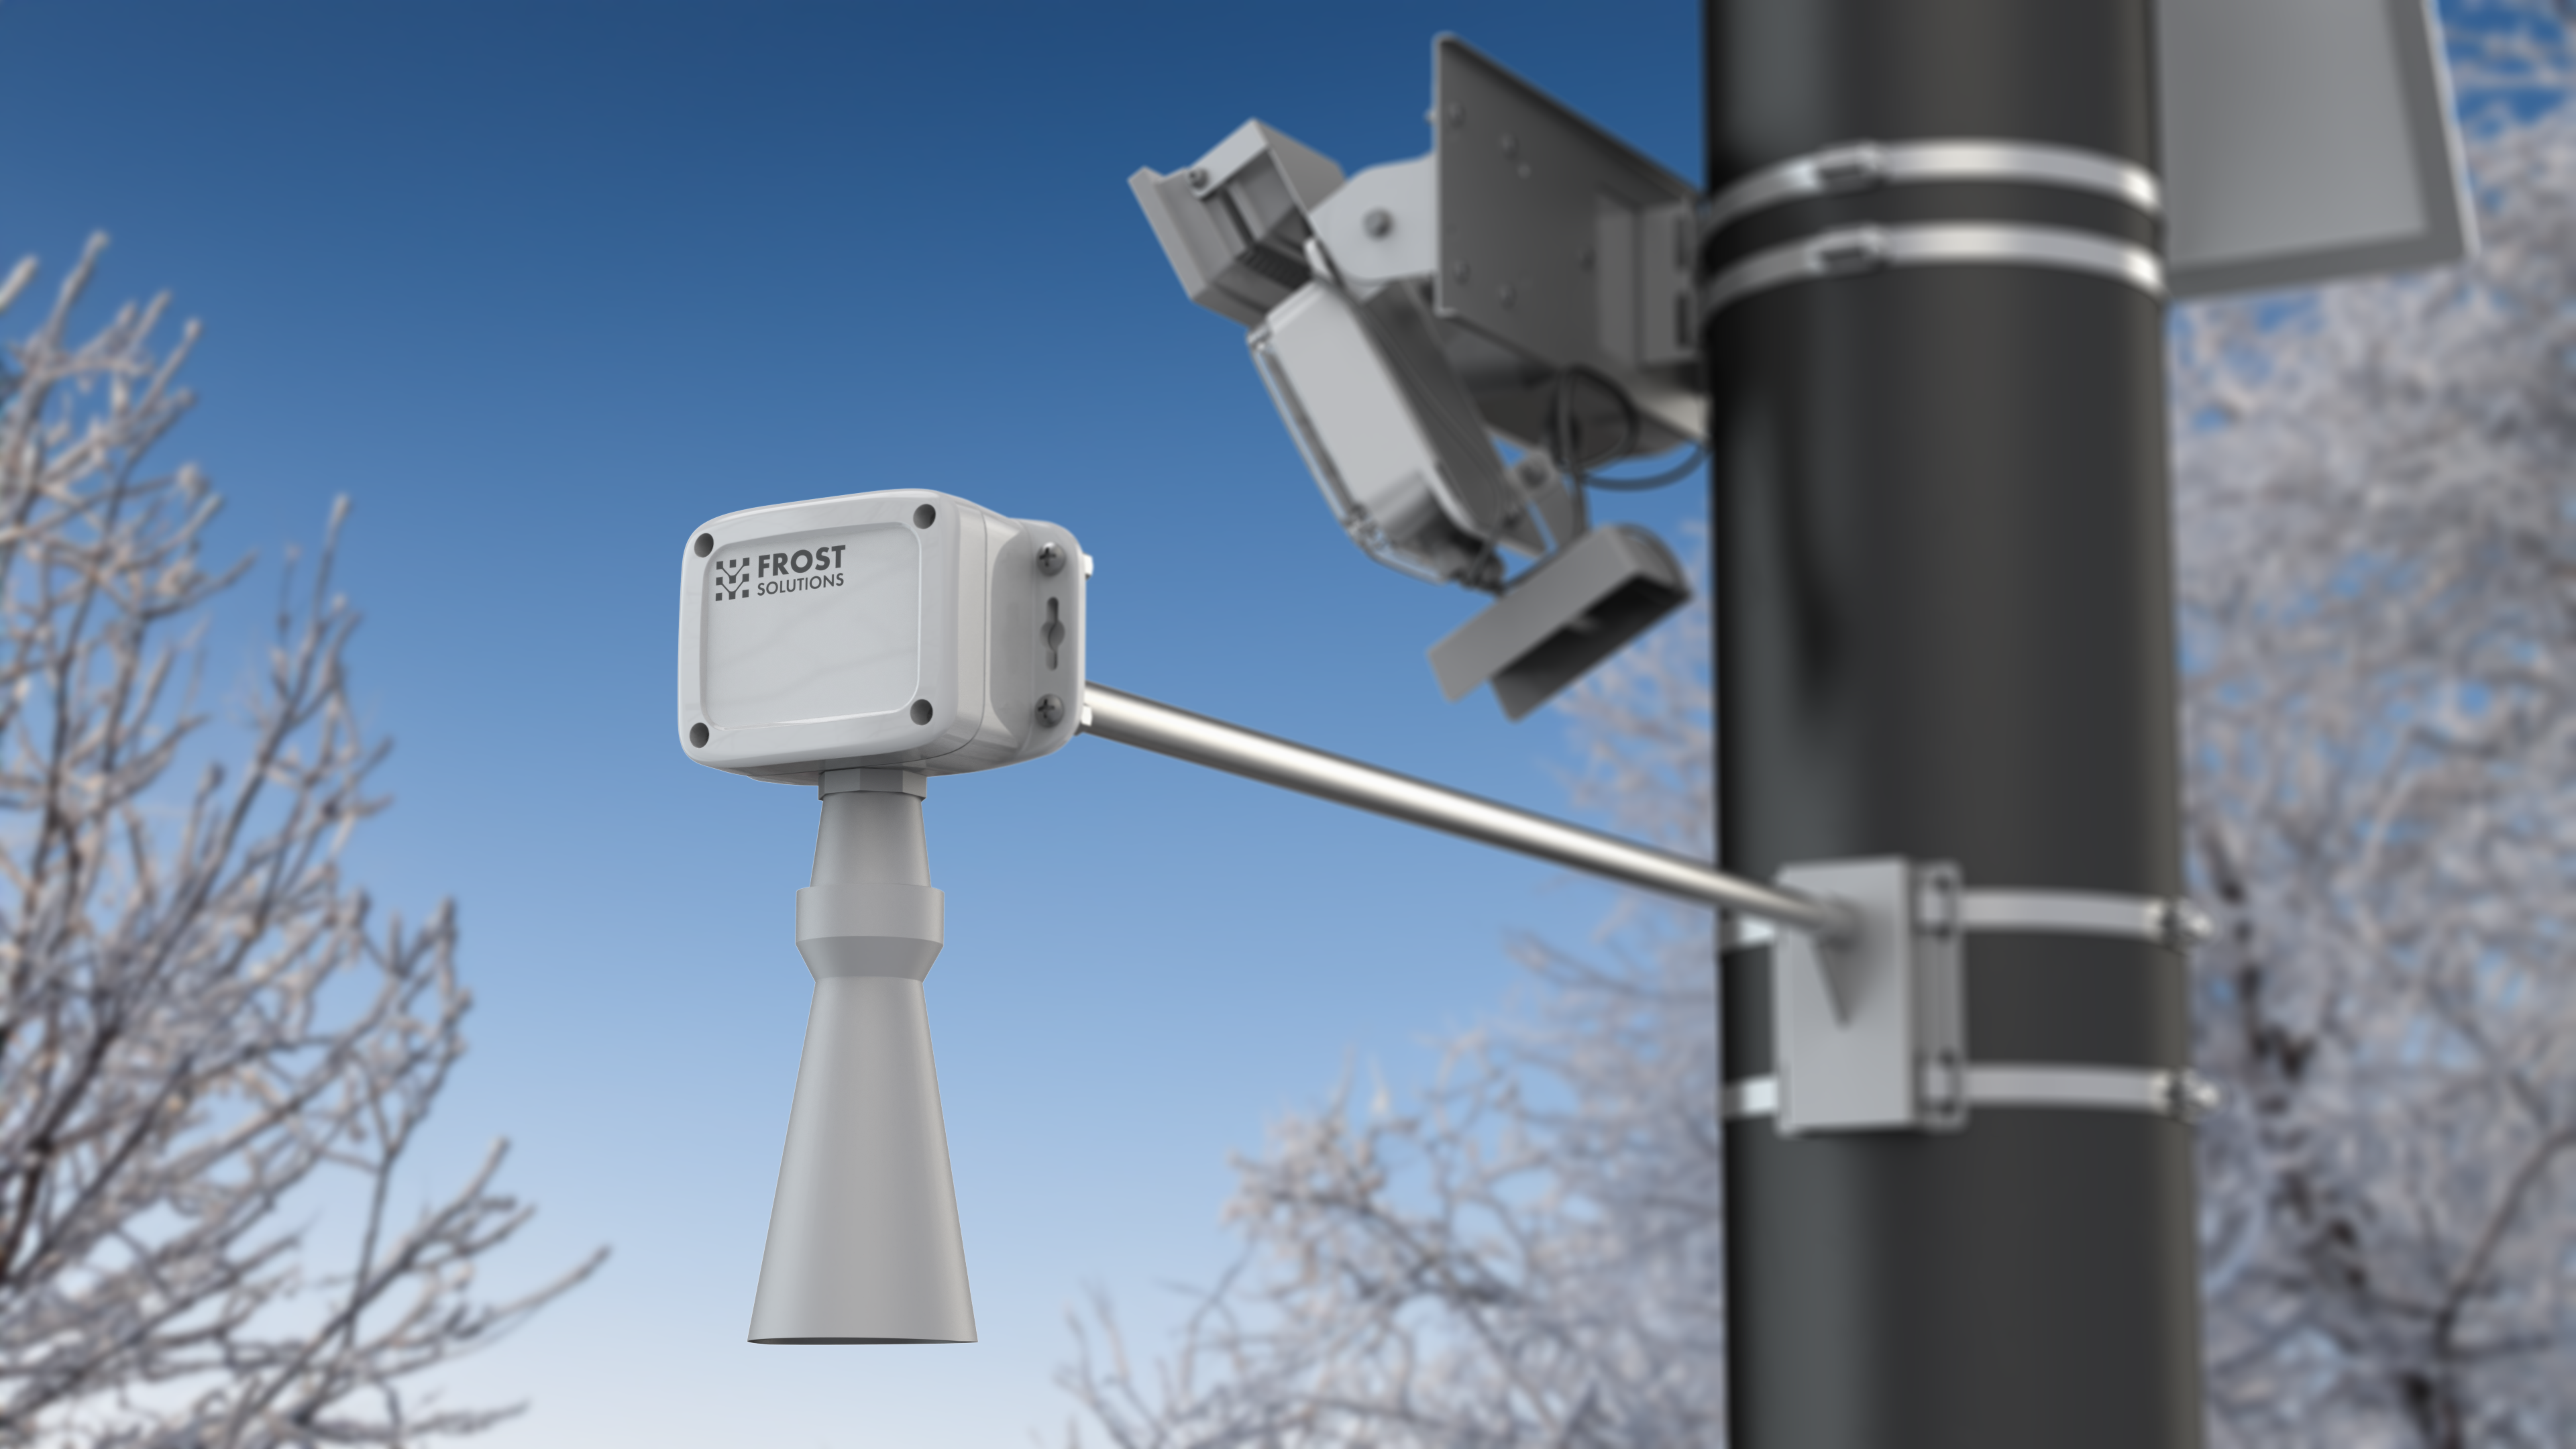 Frost Solutions' Snow Depth Sensor is best positioned next to a mini-weather station or Frost Vision Camera.